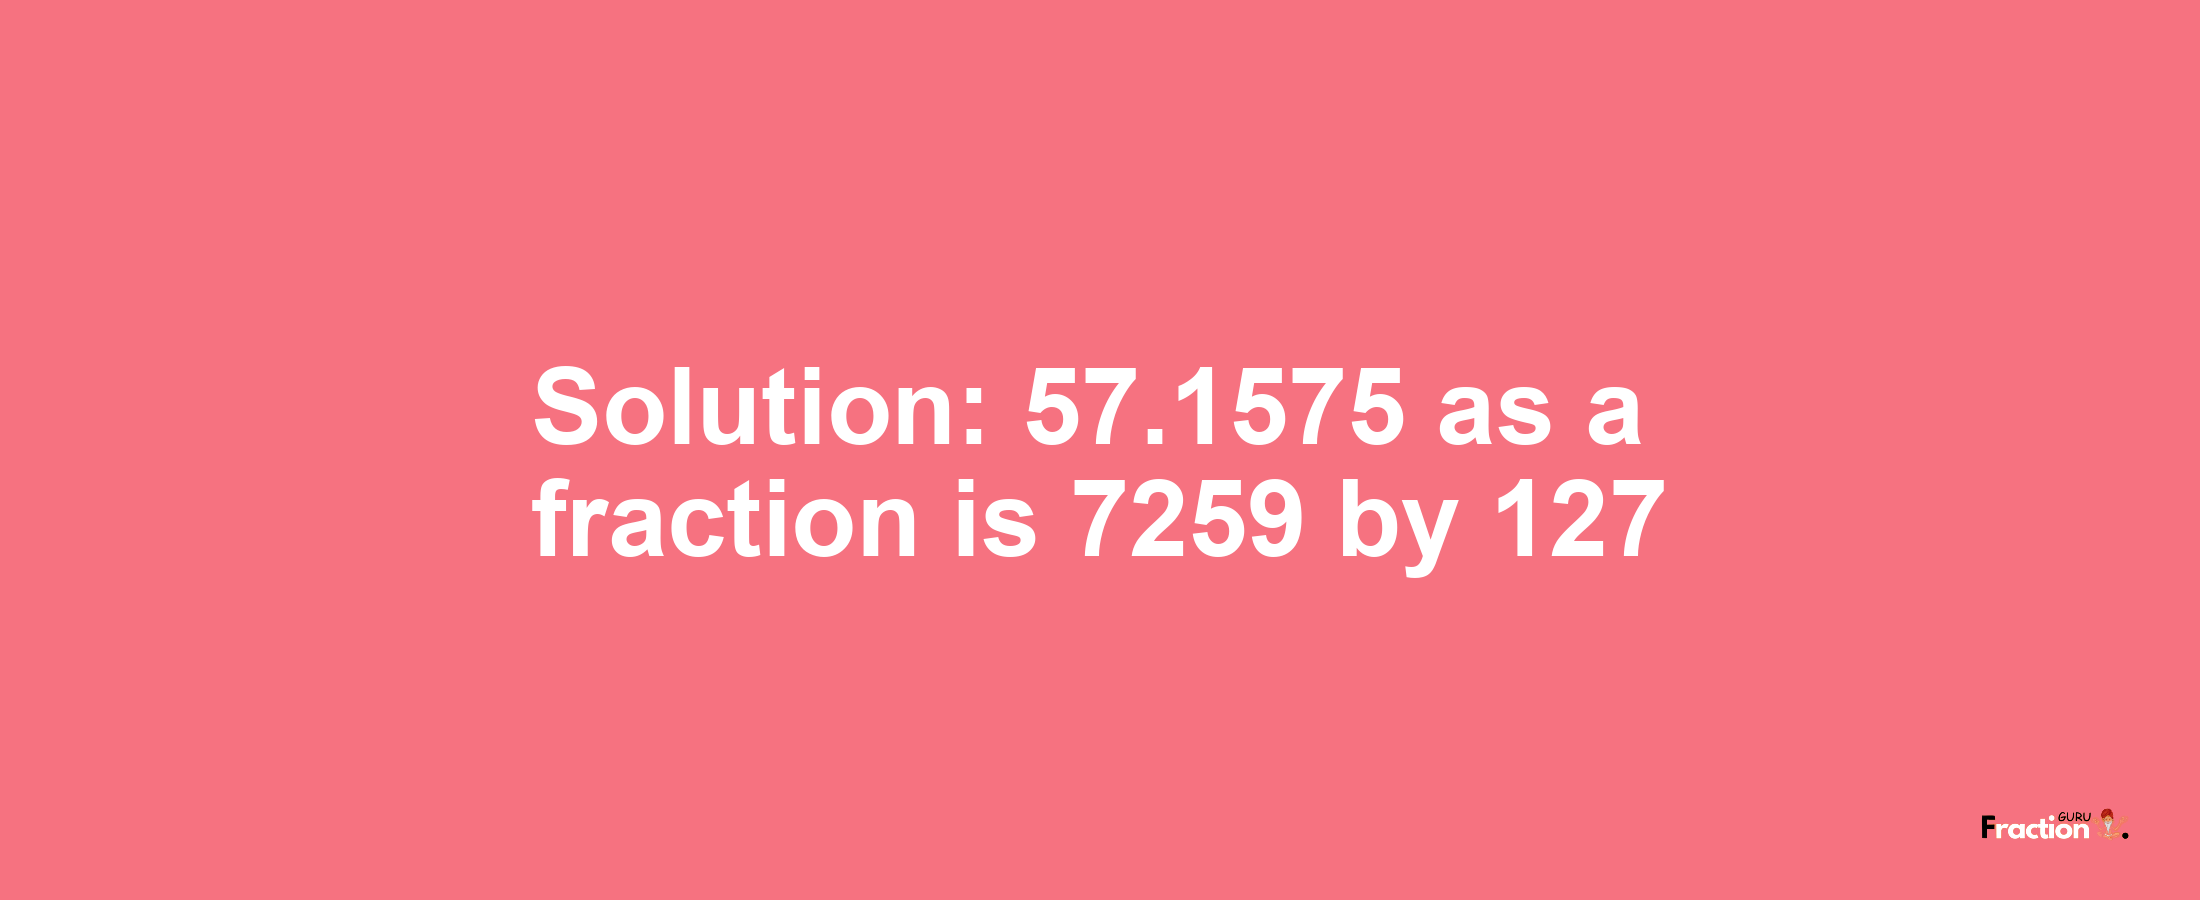 Solution:57.1575 as a fraction is 7259/127